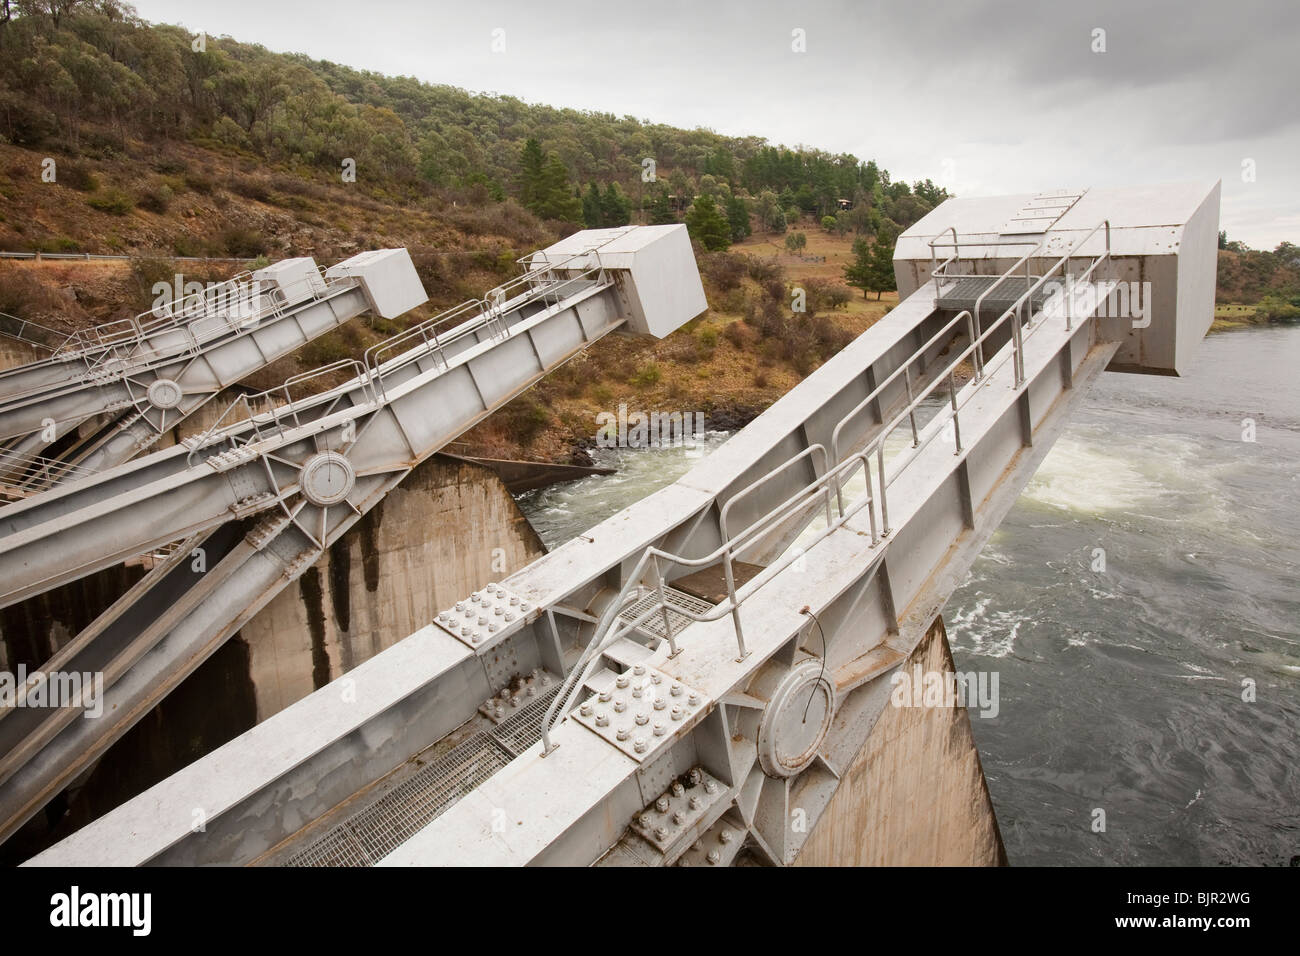 Khancoban dam, part of the Snowy Mountains Hydro scheme in New South Wales, Australia. Stock Photo